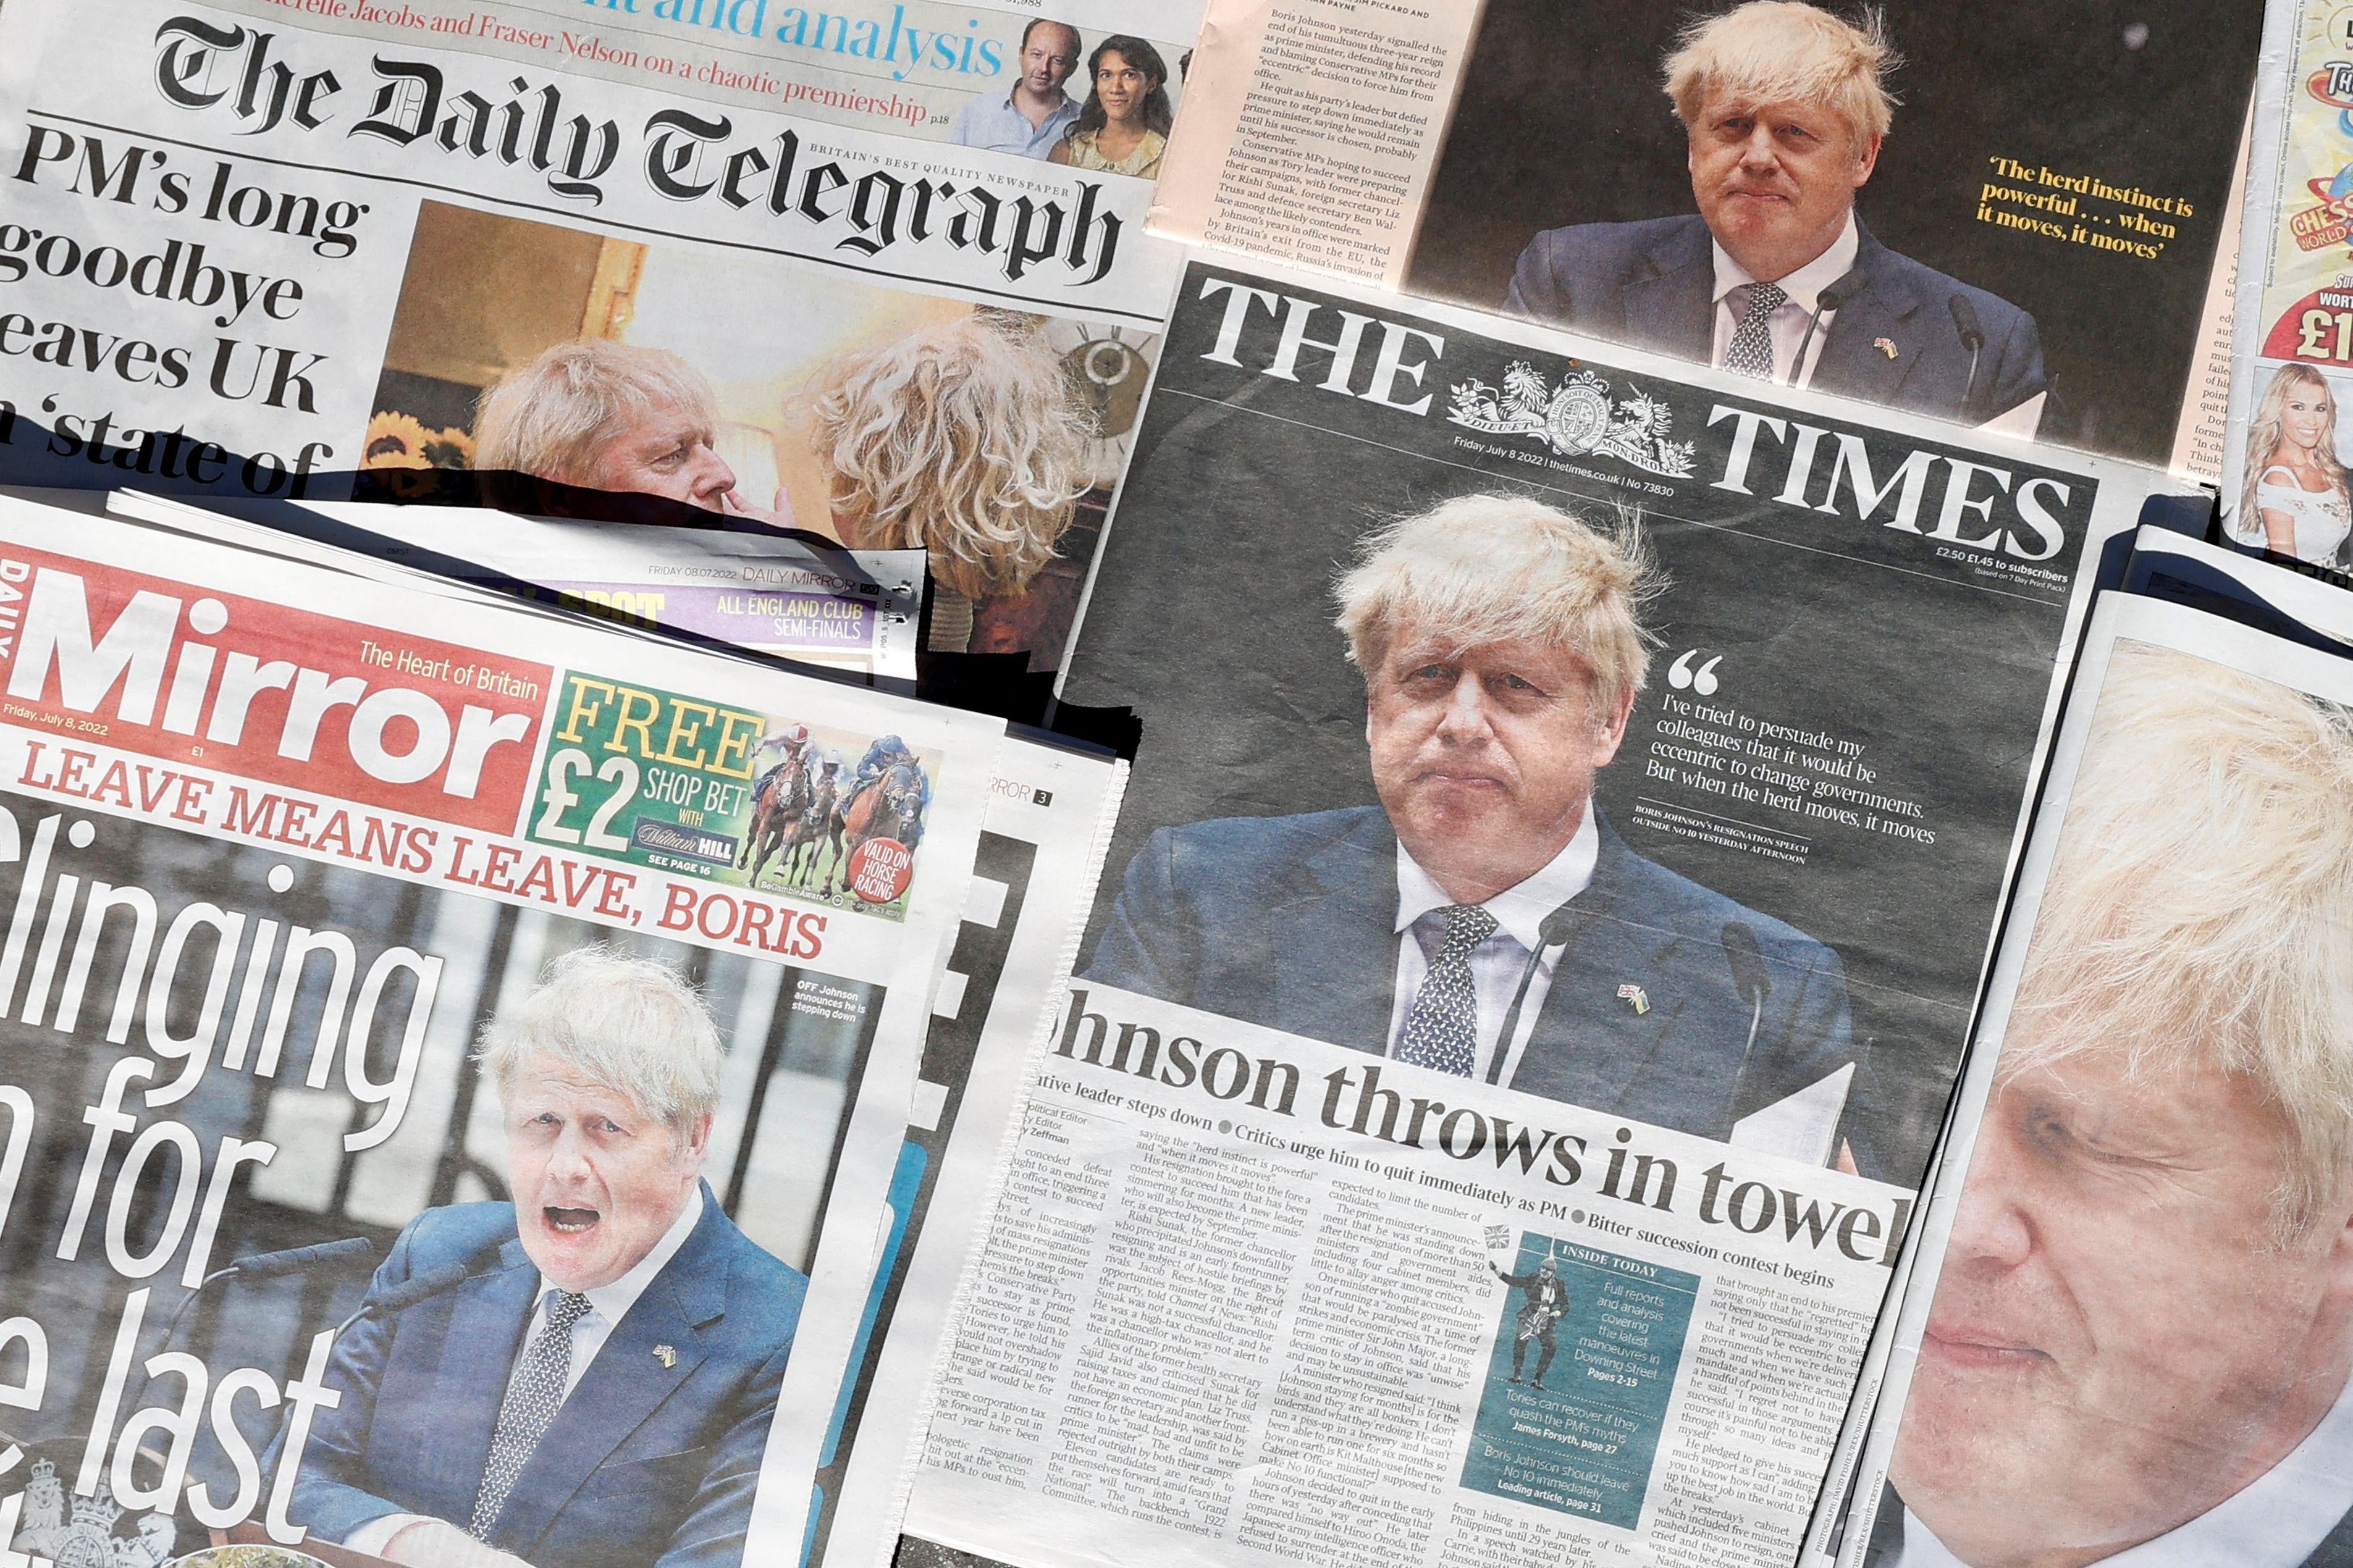 Front pages of British national newspapers, each leading with a front page story of the resignation of Boris Johnson as leader of Britain's Conservative Party, are arranged for a photograph in Downing Street, the official residence of Britain's Prime Minister, in central London on July 8, 2022. - UK Prime Minister Boris Johnson on Thursday quit as Conservative party leader, after three tumultuous years in charge marked by Brexit, Covid and mounting scandals. Johnson, 58, announced that he would step down after a slew of resignations this week from his top team in protest at his leadership but would stay on as prime minister until a replacement is found. (Photo by CARLOS JASSO / AFP) (Photo by CARLOS JASSO/AFP via Getty Images)